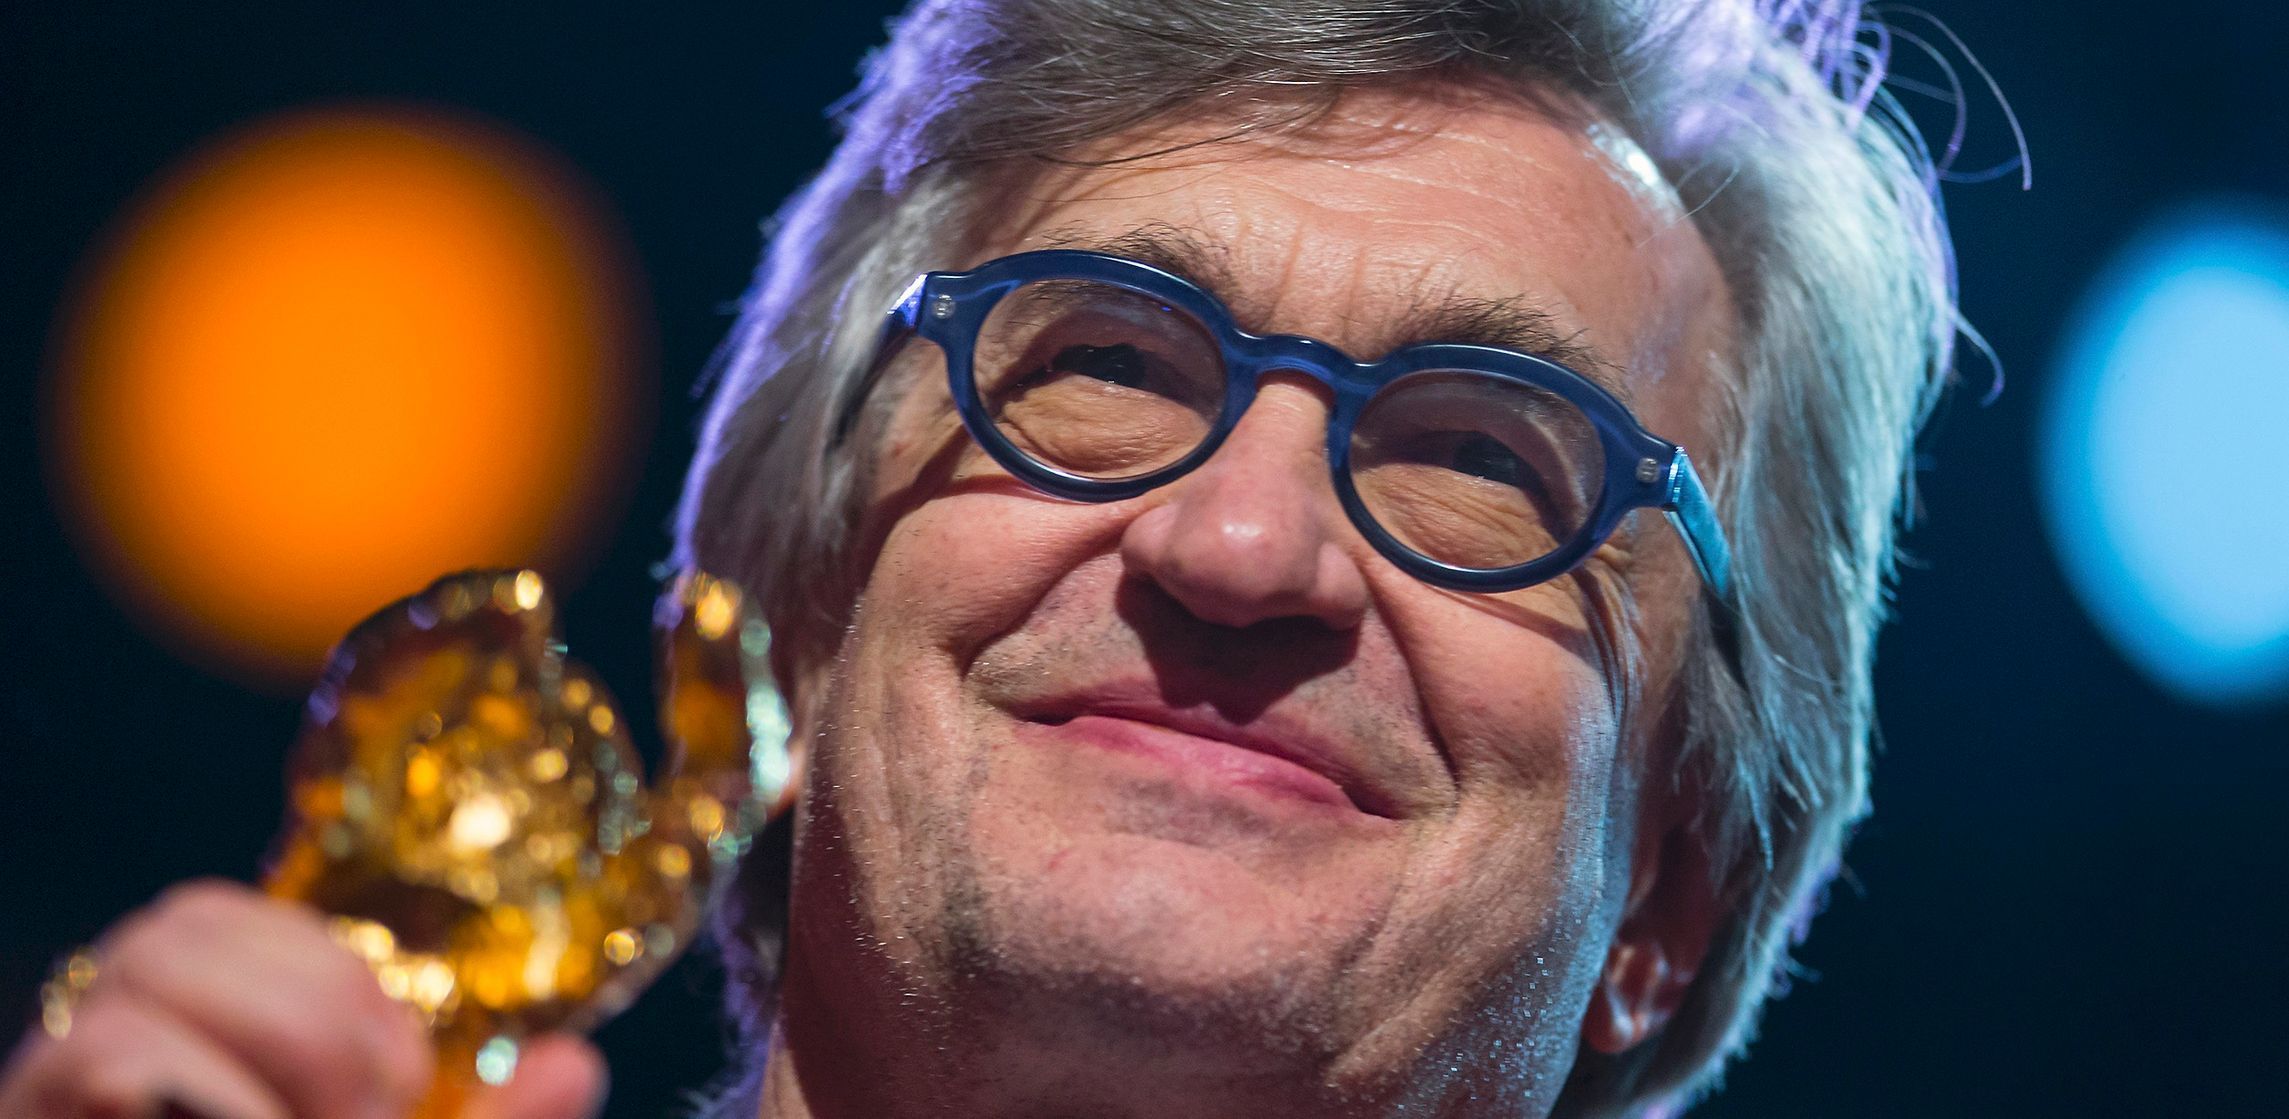 Director Wenders accepts an Honorary Golden Bear at the 65th Berlinale International Film Festival in Berlin